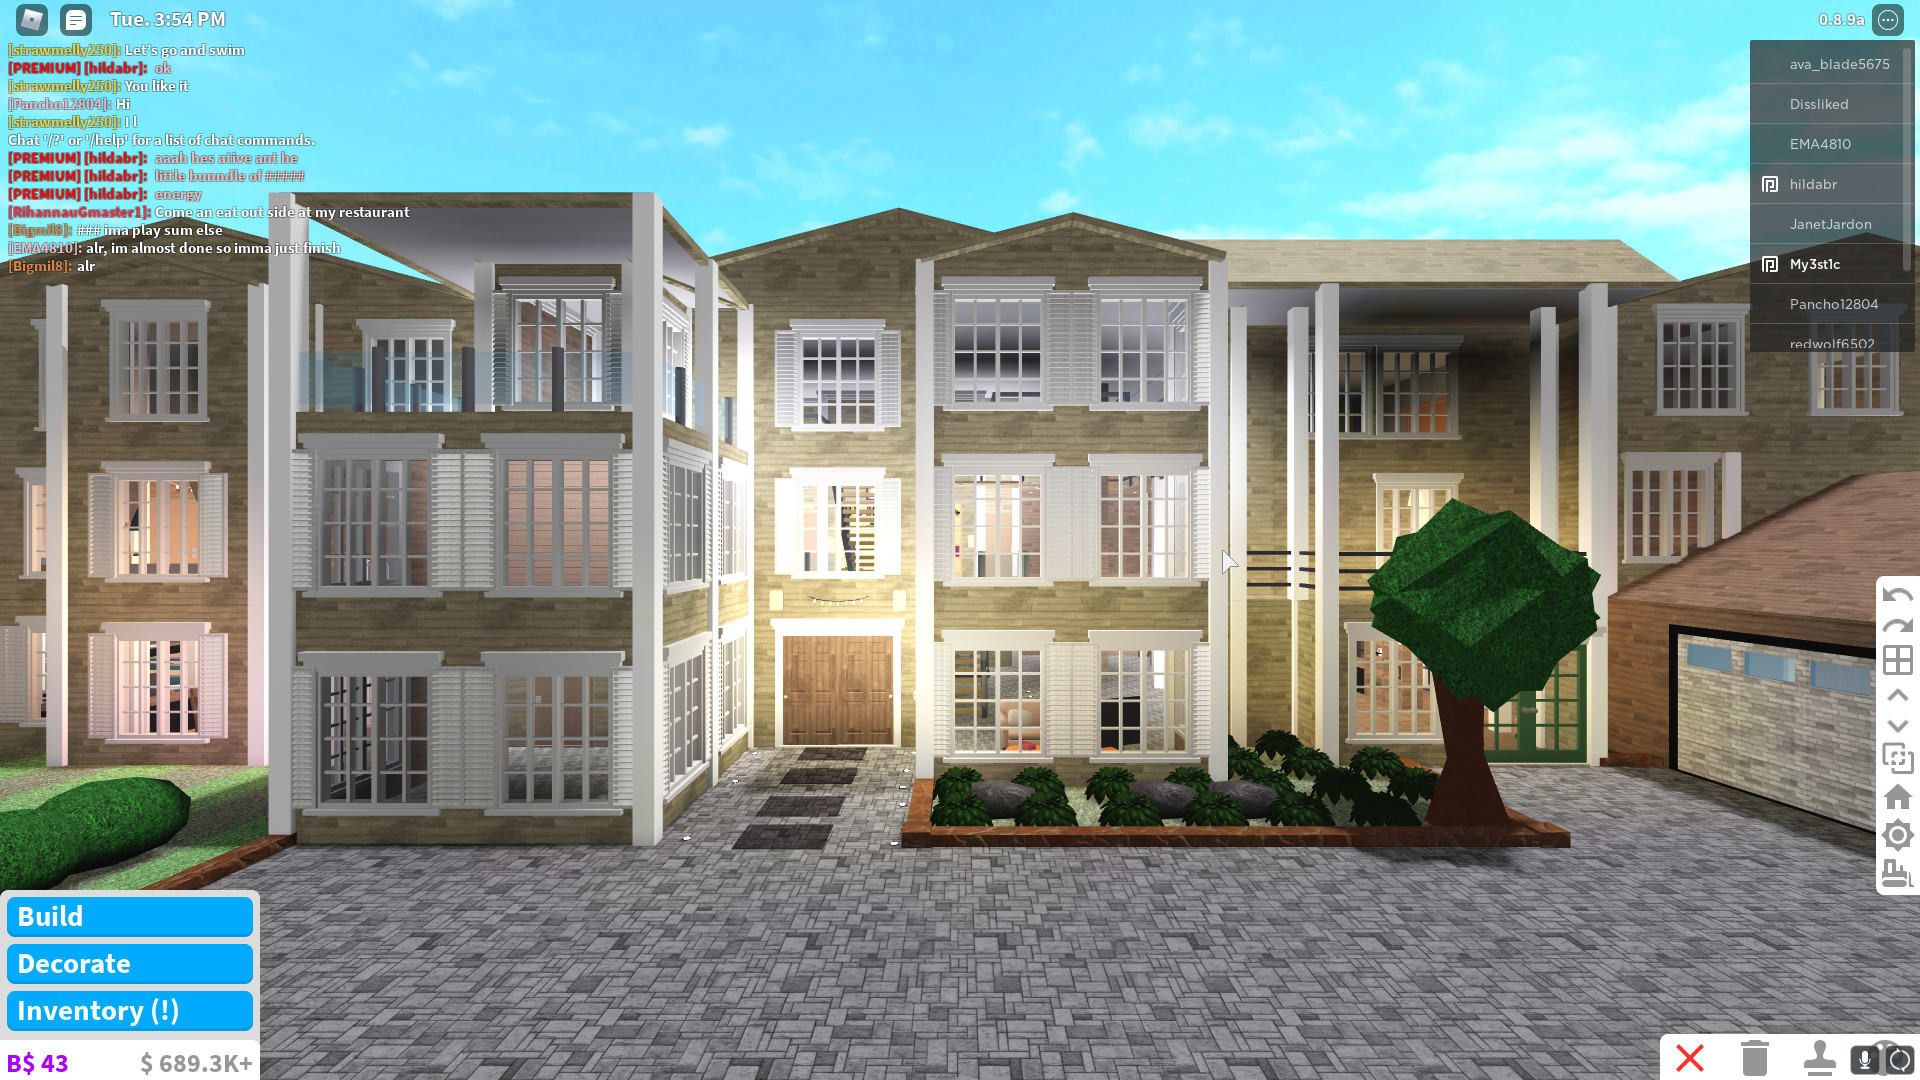 Build You A Dream House Or Mansion In Roblox Bloxburg By Omegawafrgaming - bloxburg mansions roblox